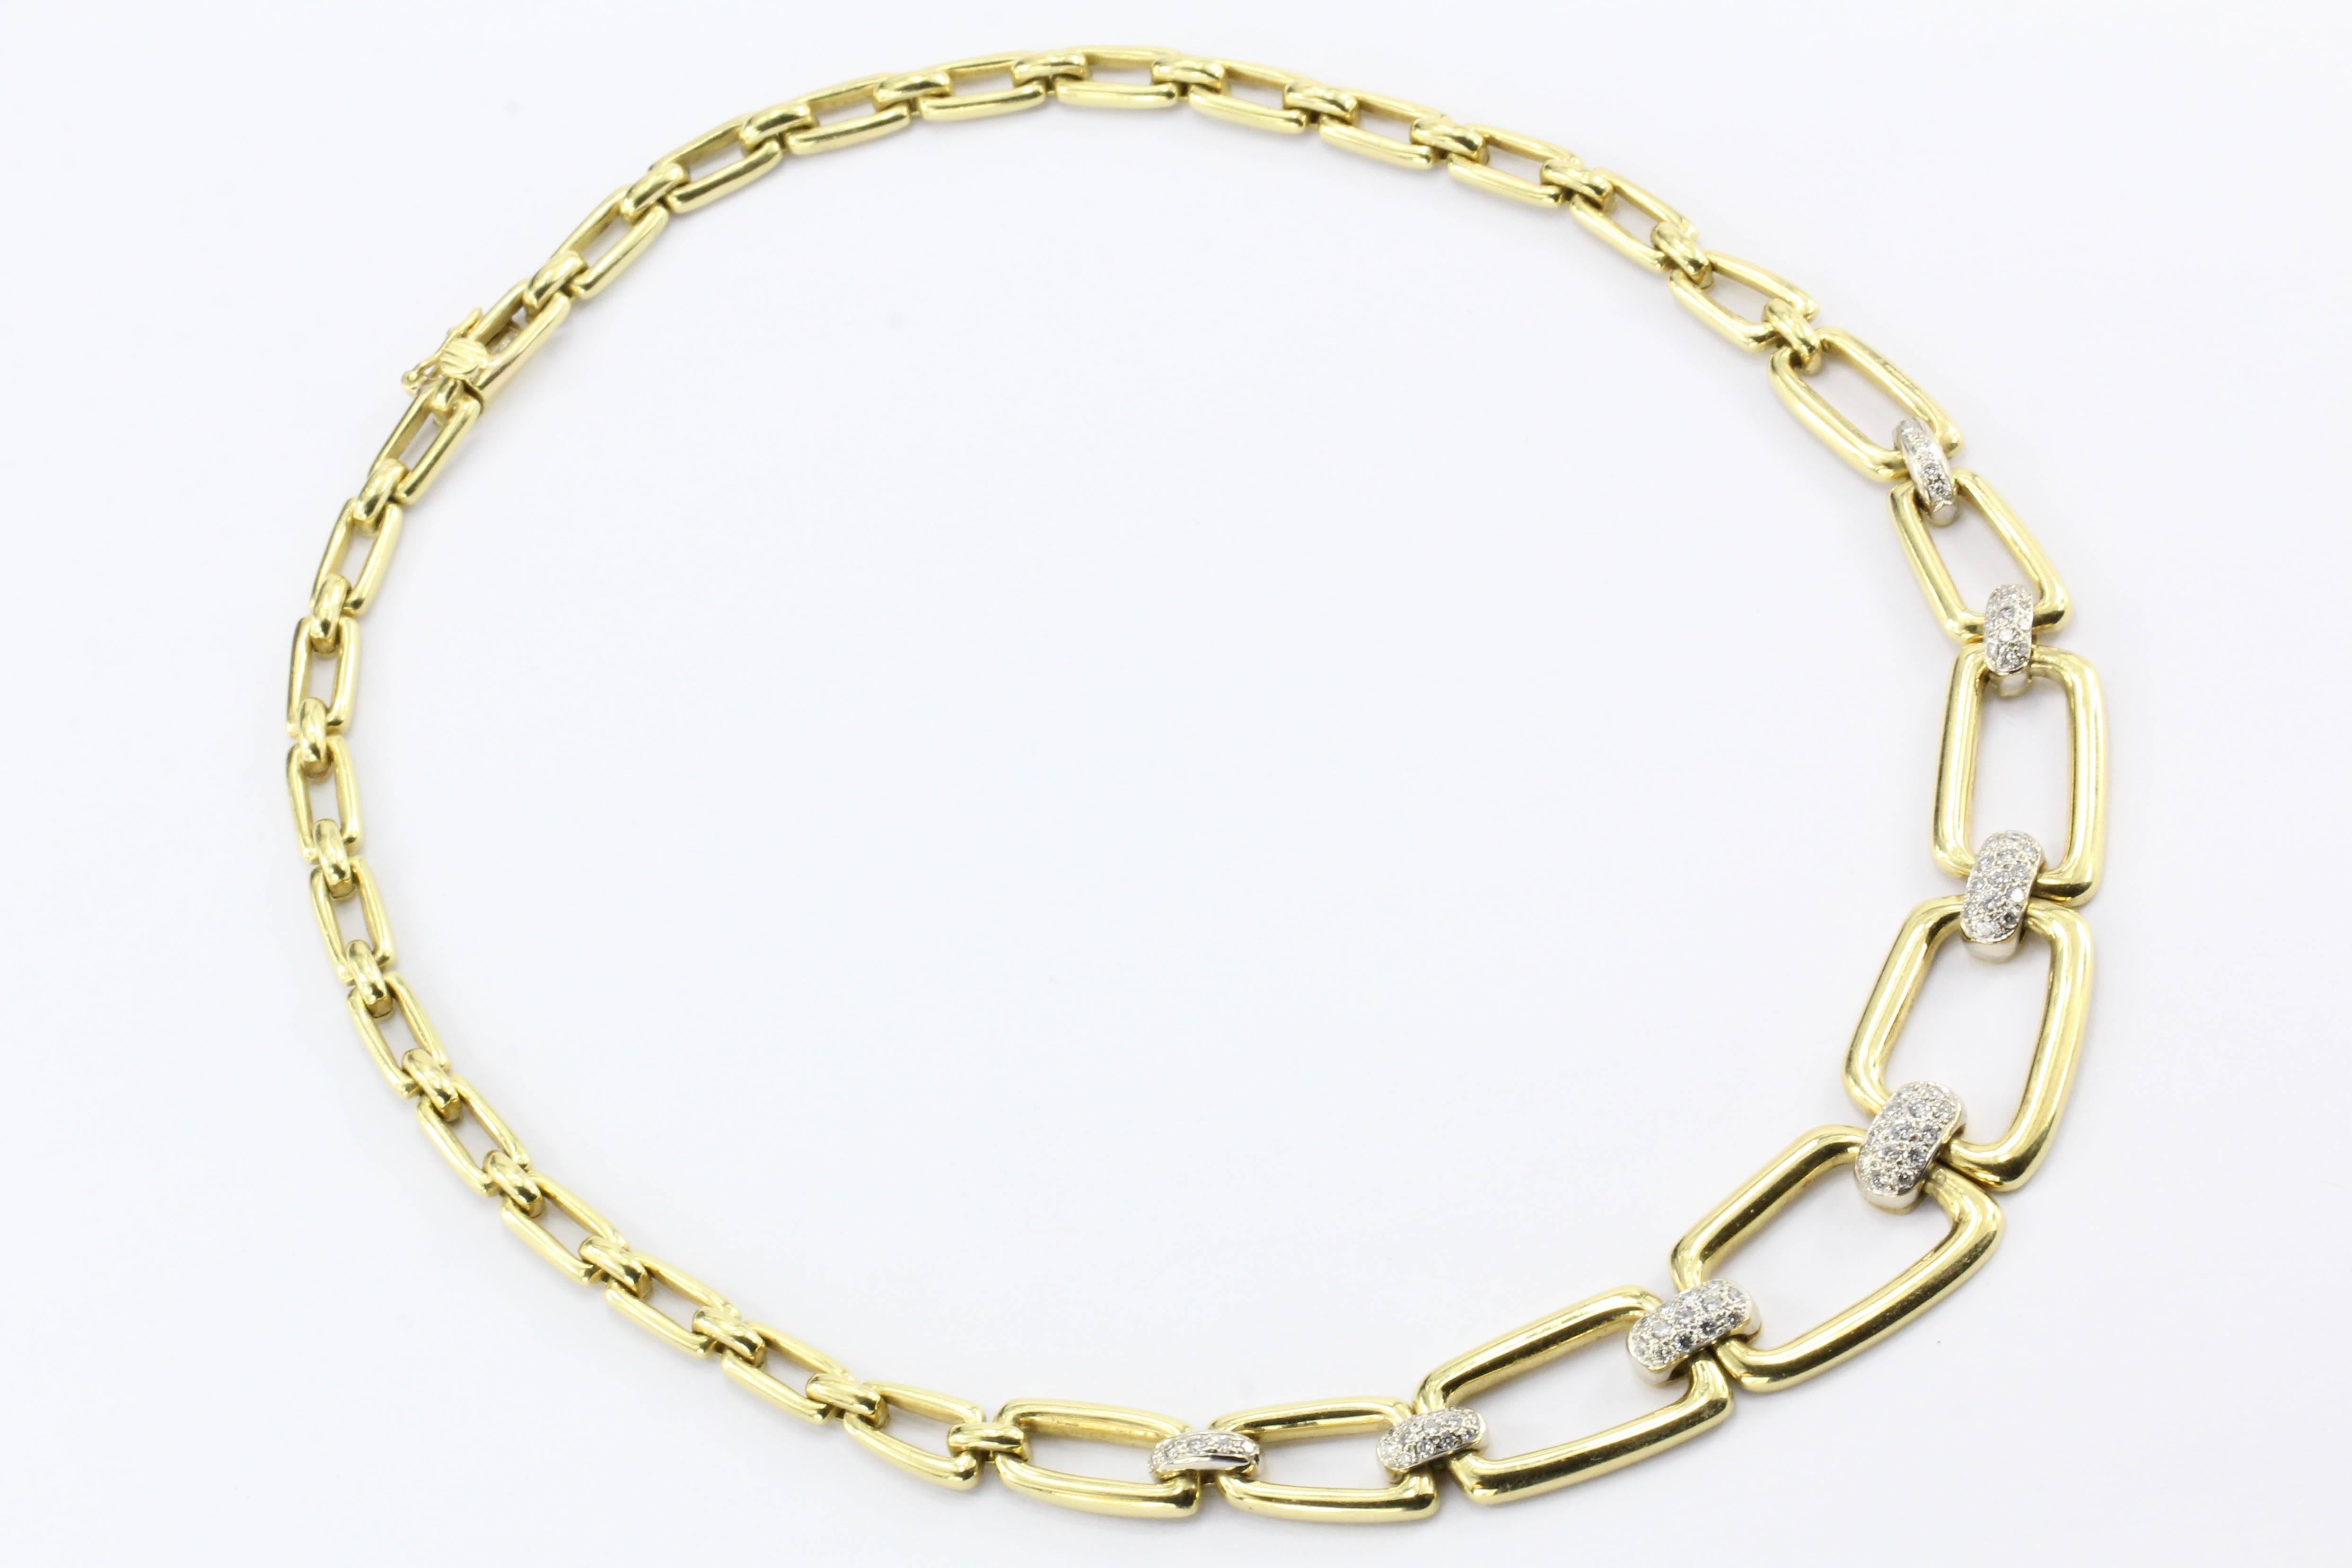 Vintage 18k Gold Graduated Chain Link Diamond Necklace

Era: Modern c.1980's

Hallmarks: 18K

Composition: 18k Yellow Gold

Primary Stone: Diamonds

Stone Carat: 1.5 ctw

Color / Clarity: F/G - Vs1/2

Width Measurement: .75" at its